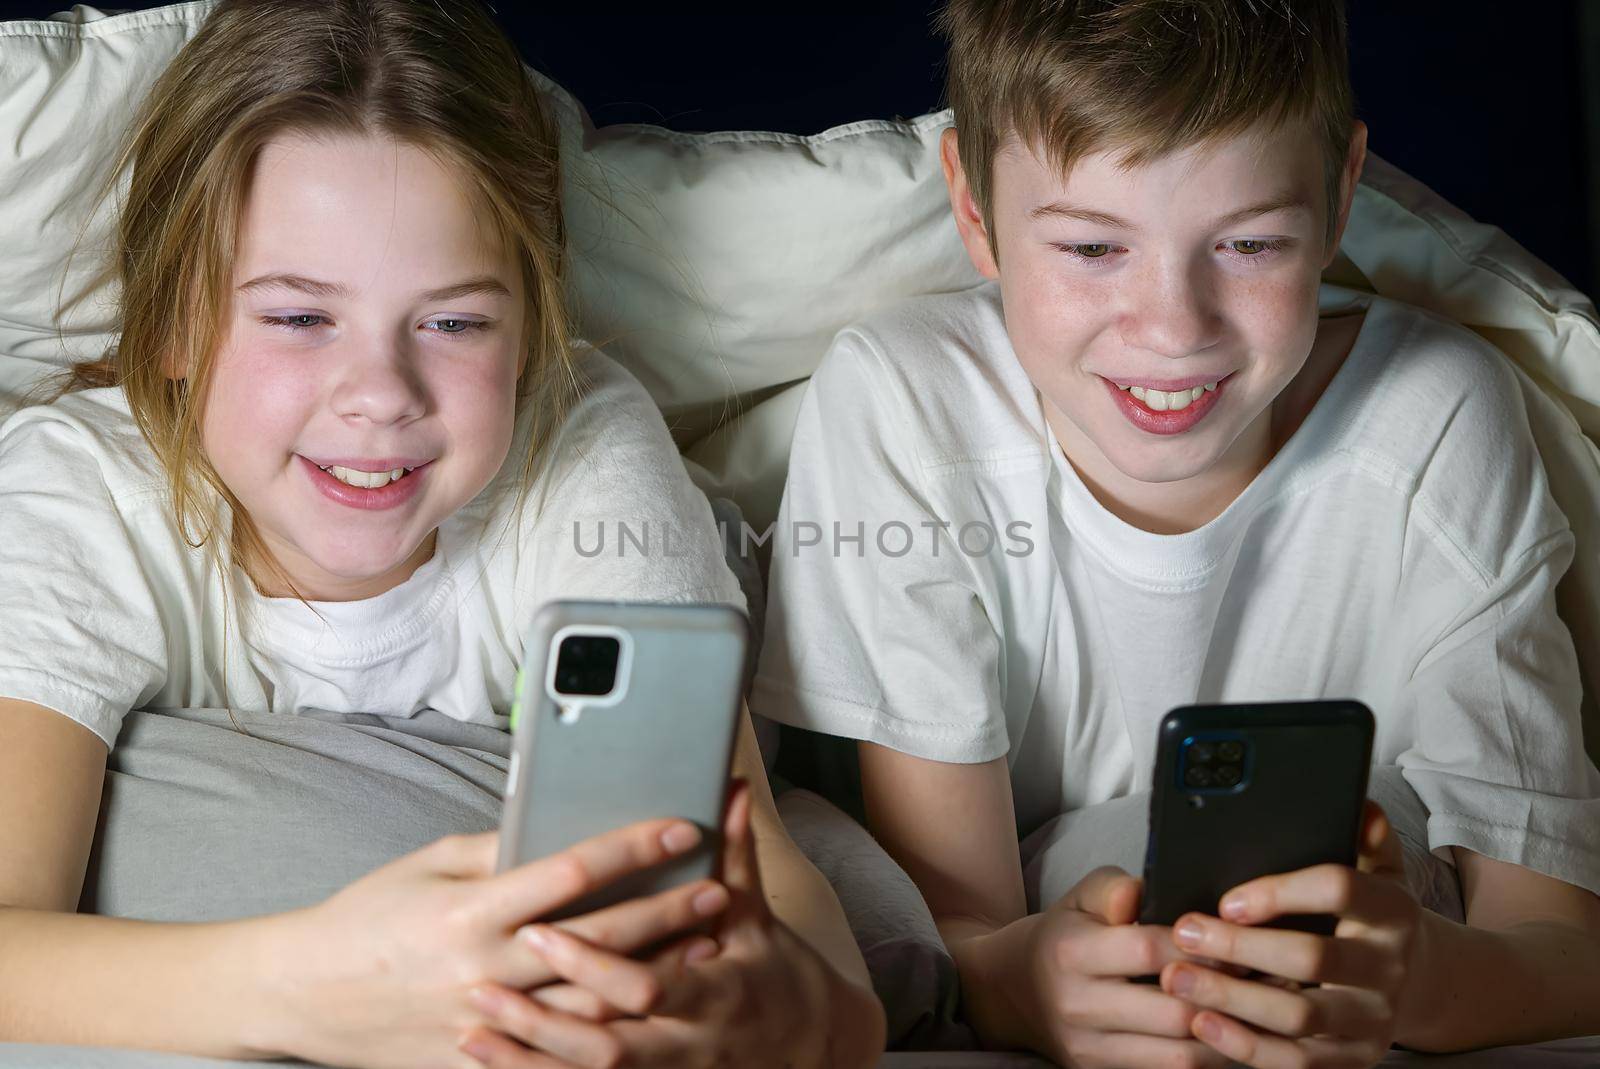 children play games on a smartphone or tablet at night under a blanket, rewrites with friends on social networks. social media addiction by PhotoTime